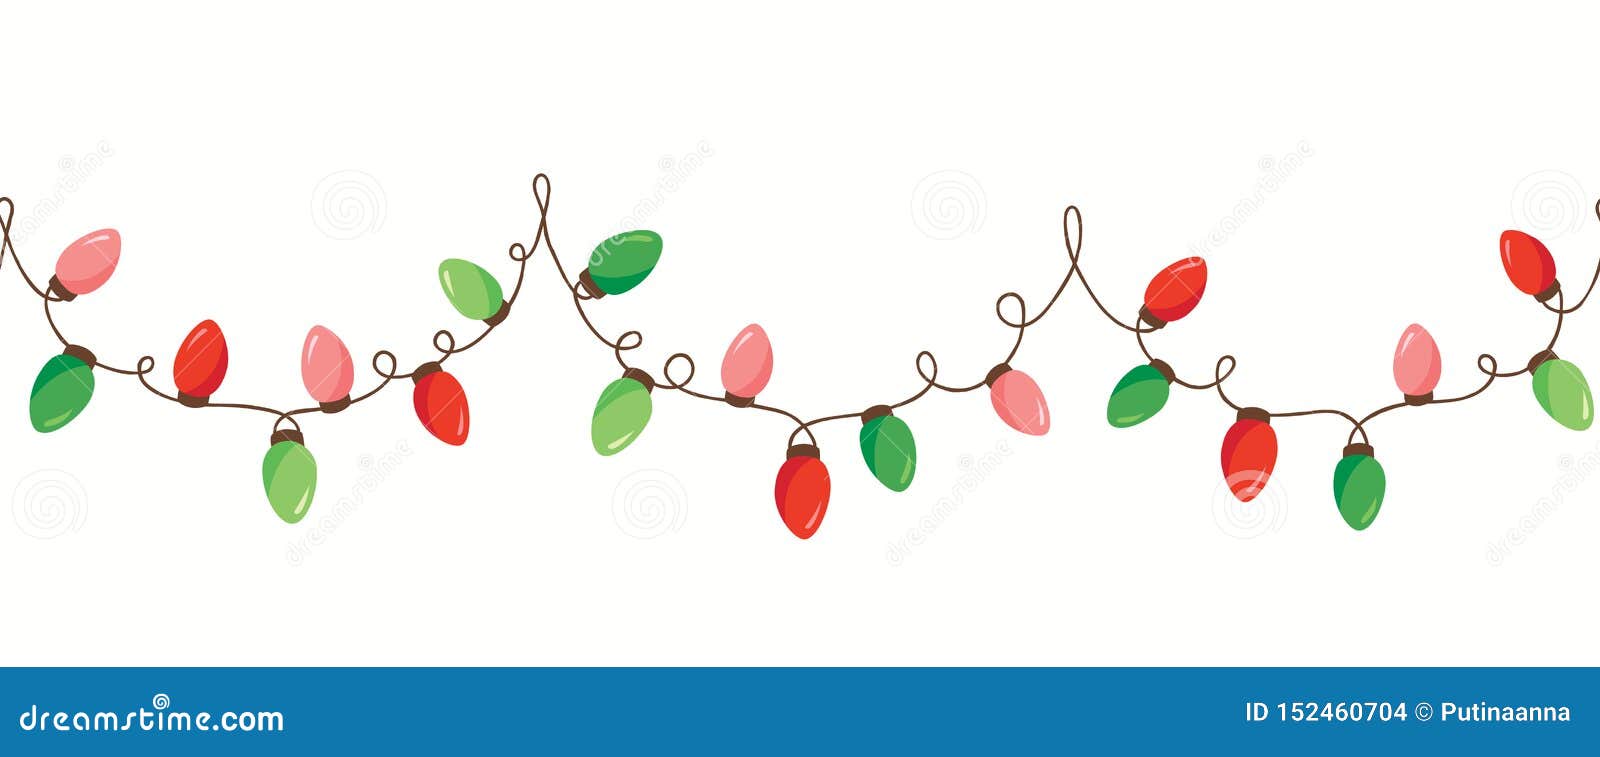  red green holiday christmas new year intertwined string lights  horizontal seamless border background